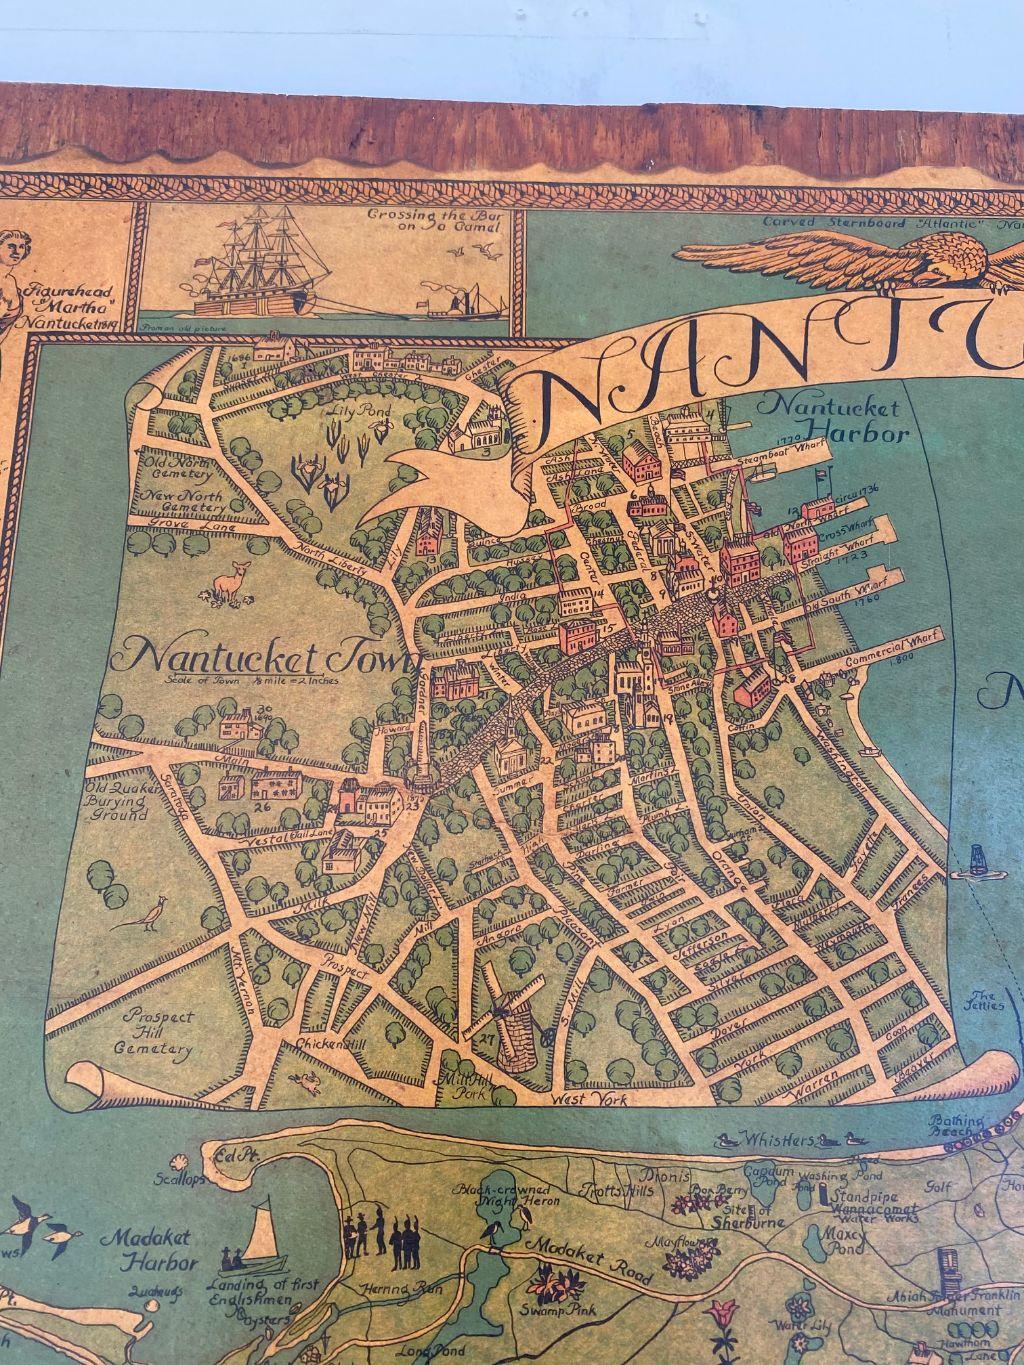 American Map of Nantucket, Ruth Haviland Sutton, Published by Miller, 1964